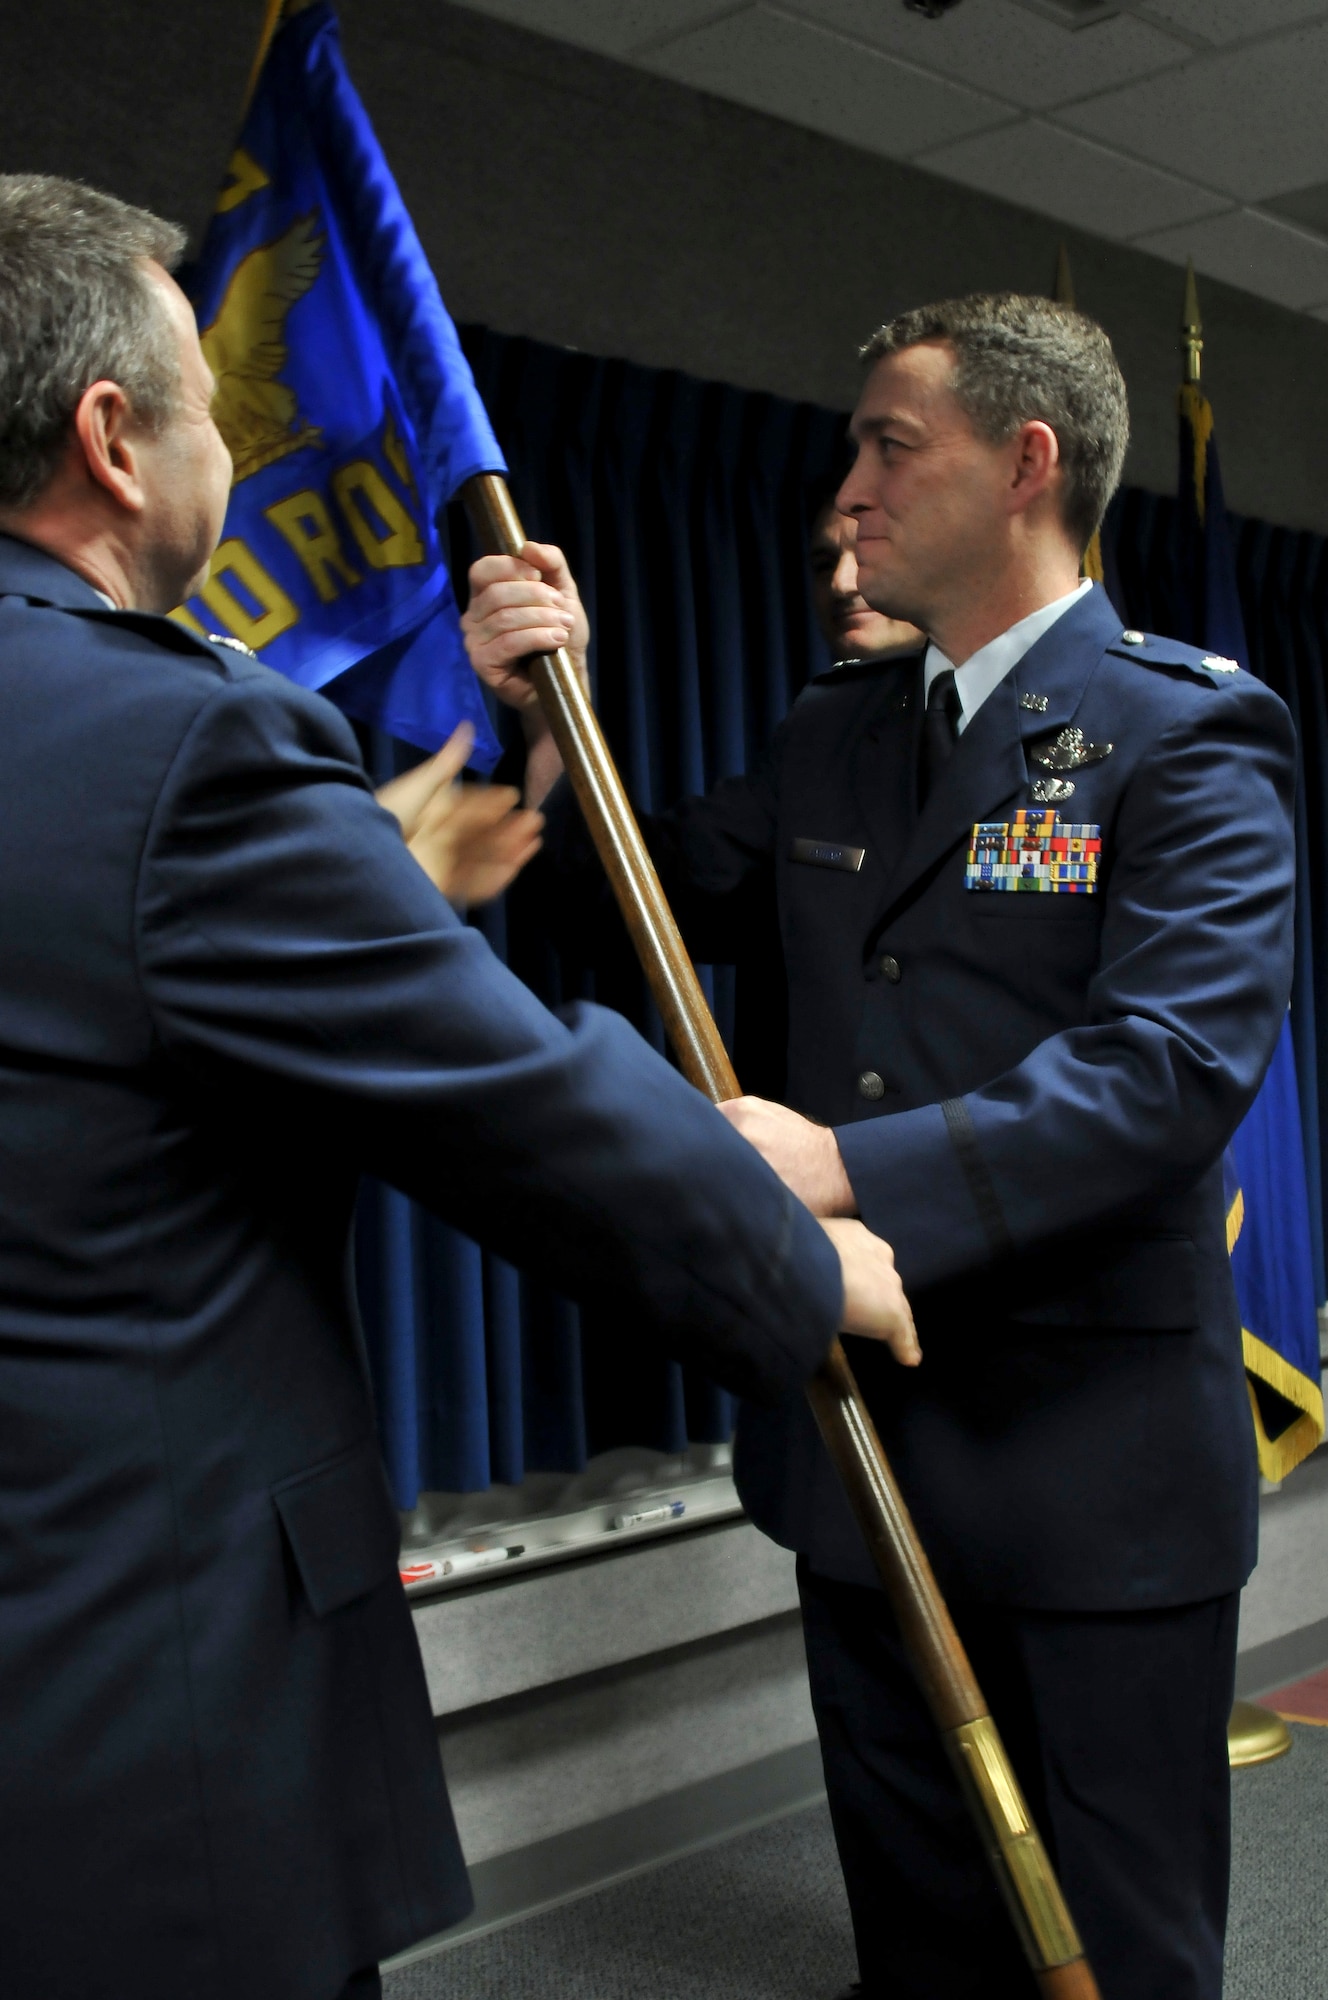 JOINT BASE ELMENDORF-RICHARDSON, Alaska -- Lt. Col. Steven Latham takes command of the 210th Rescue Squadron from Lt. Col. Thomas Bolin here Nov. 3 at a change of command ceremony. Latham accepted the unit flag from Lt. Col. Michael Griesbaum, 176 Operations Group deputy commander, as a symbol of his new leadership position. National Guard photo by Staff Sgt. N Alicia Halla/ Released.